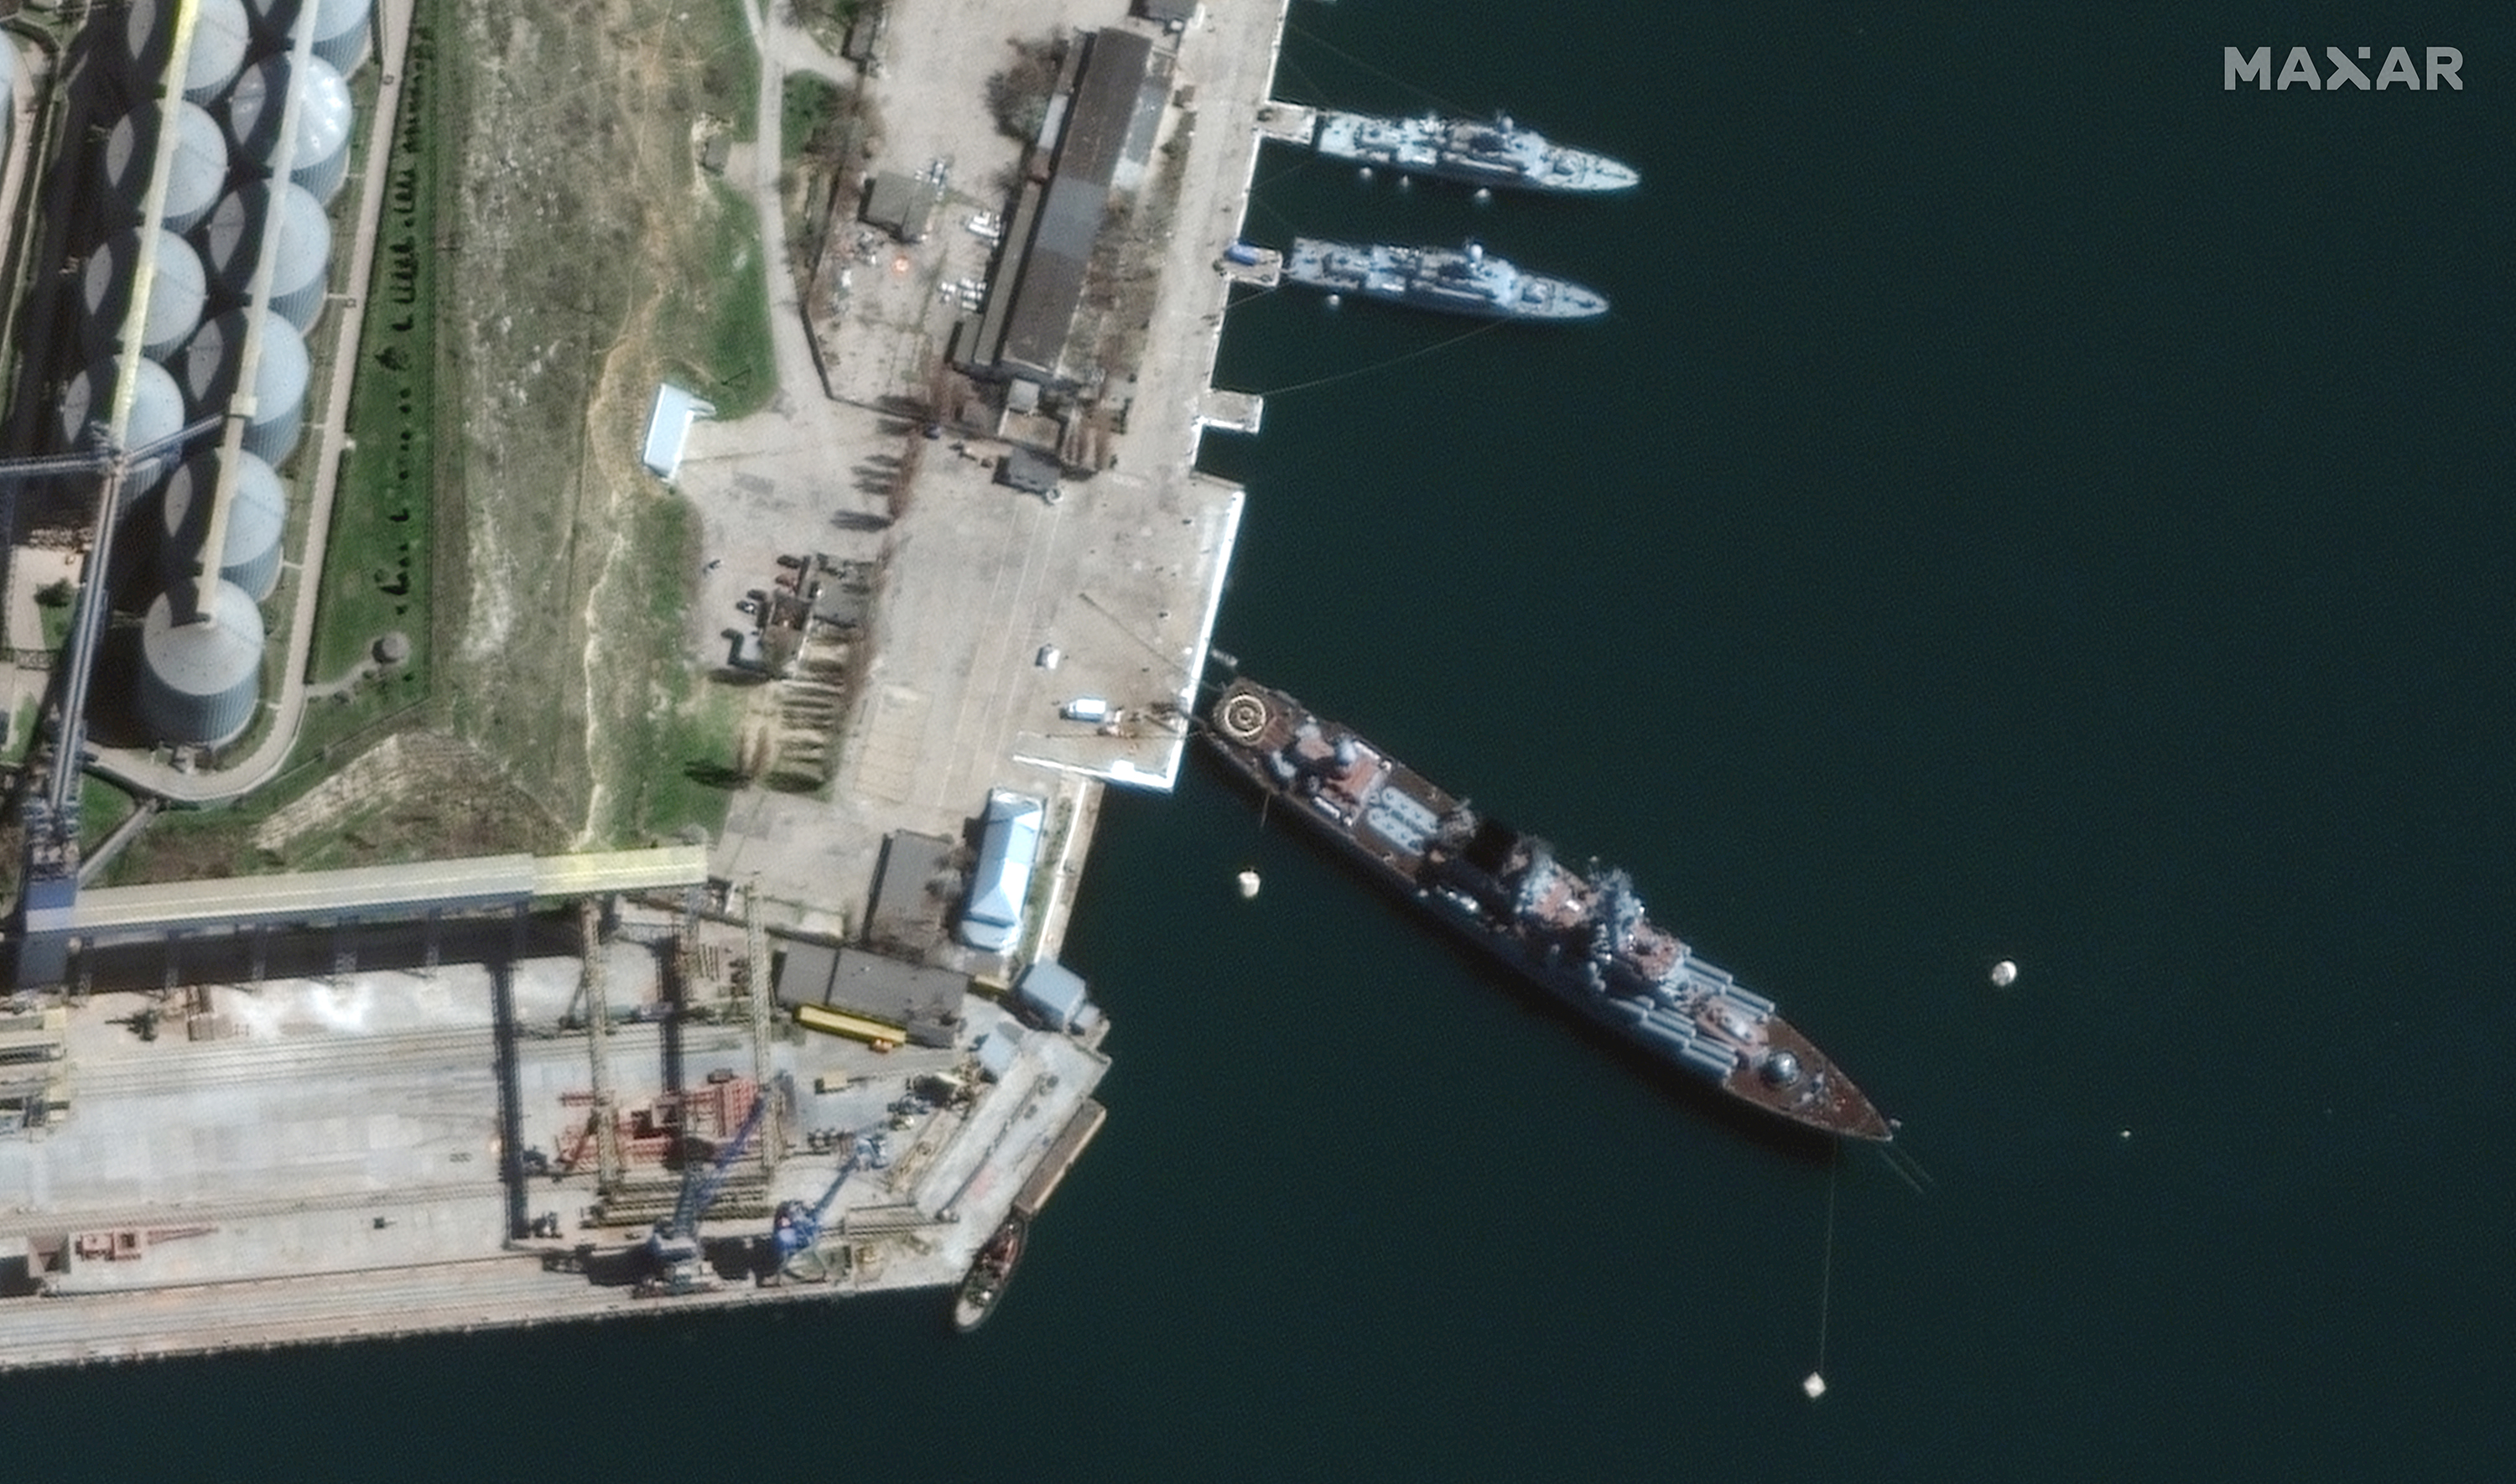 The Russian warship Moskva is seen docked in Sevastopol, Crimea in this satellite image from April 7.